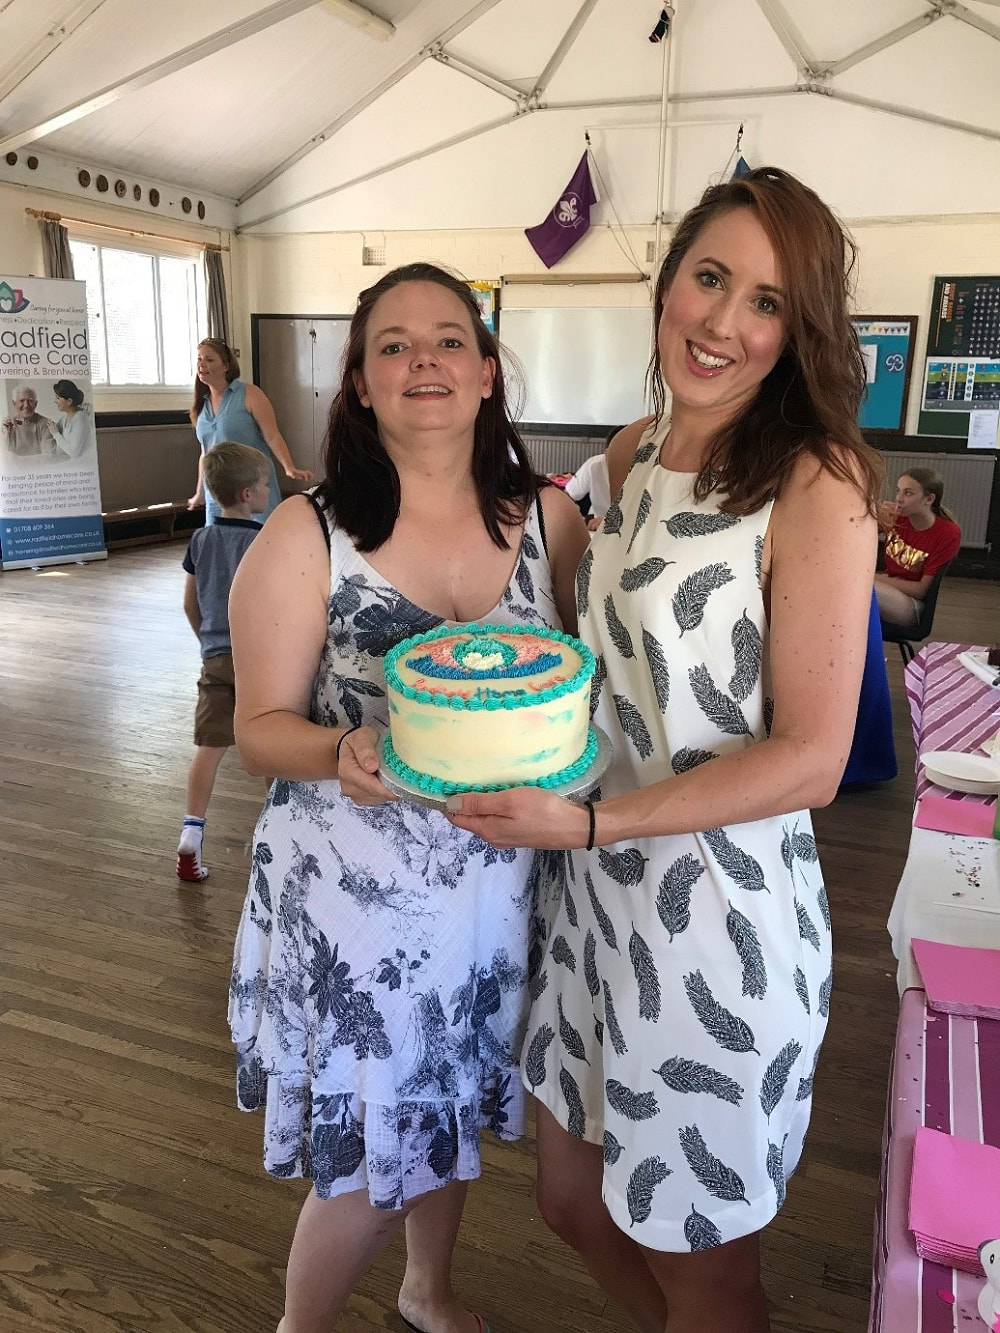 Radfield Home Care co-owners and co-directors, Lisa and Jennie wearing summer dresses holding a cake